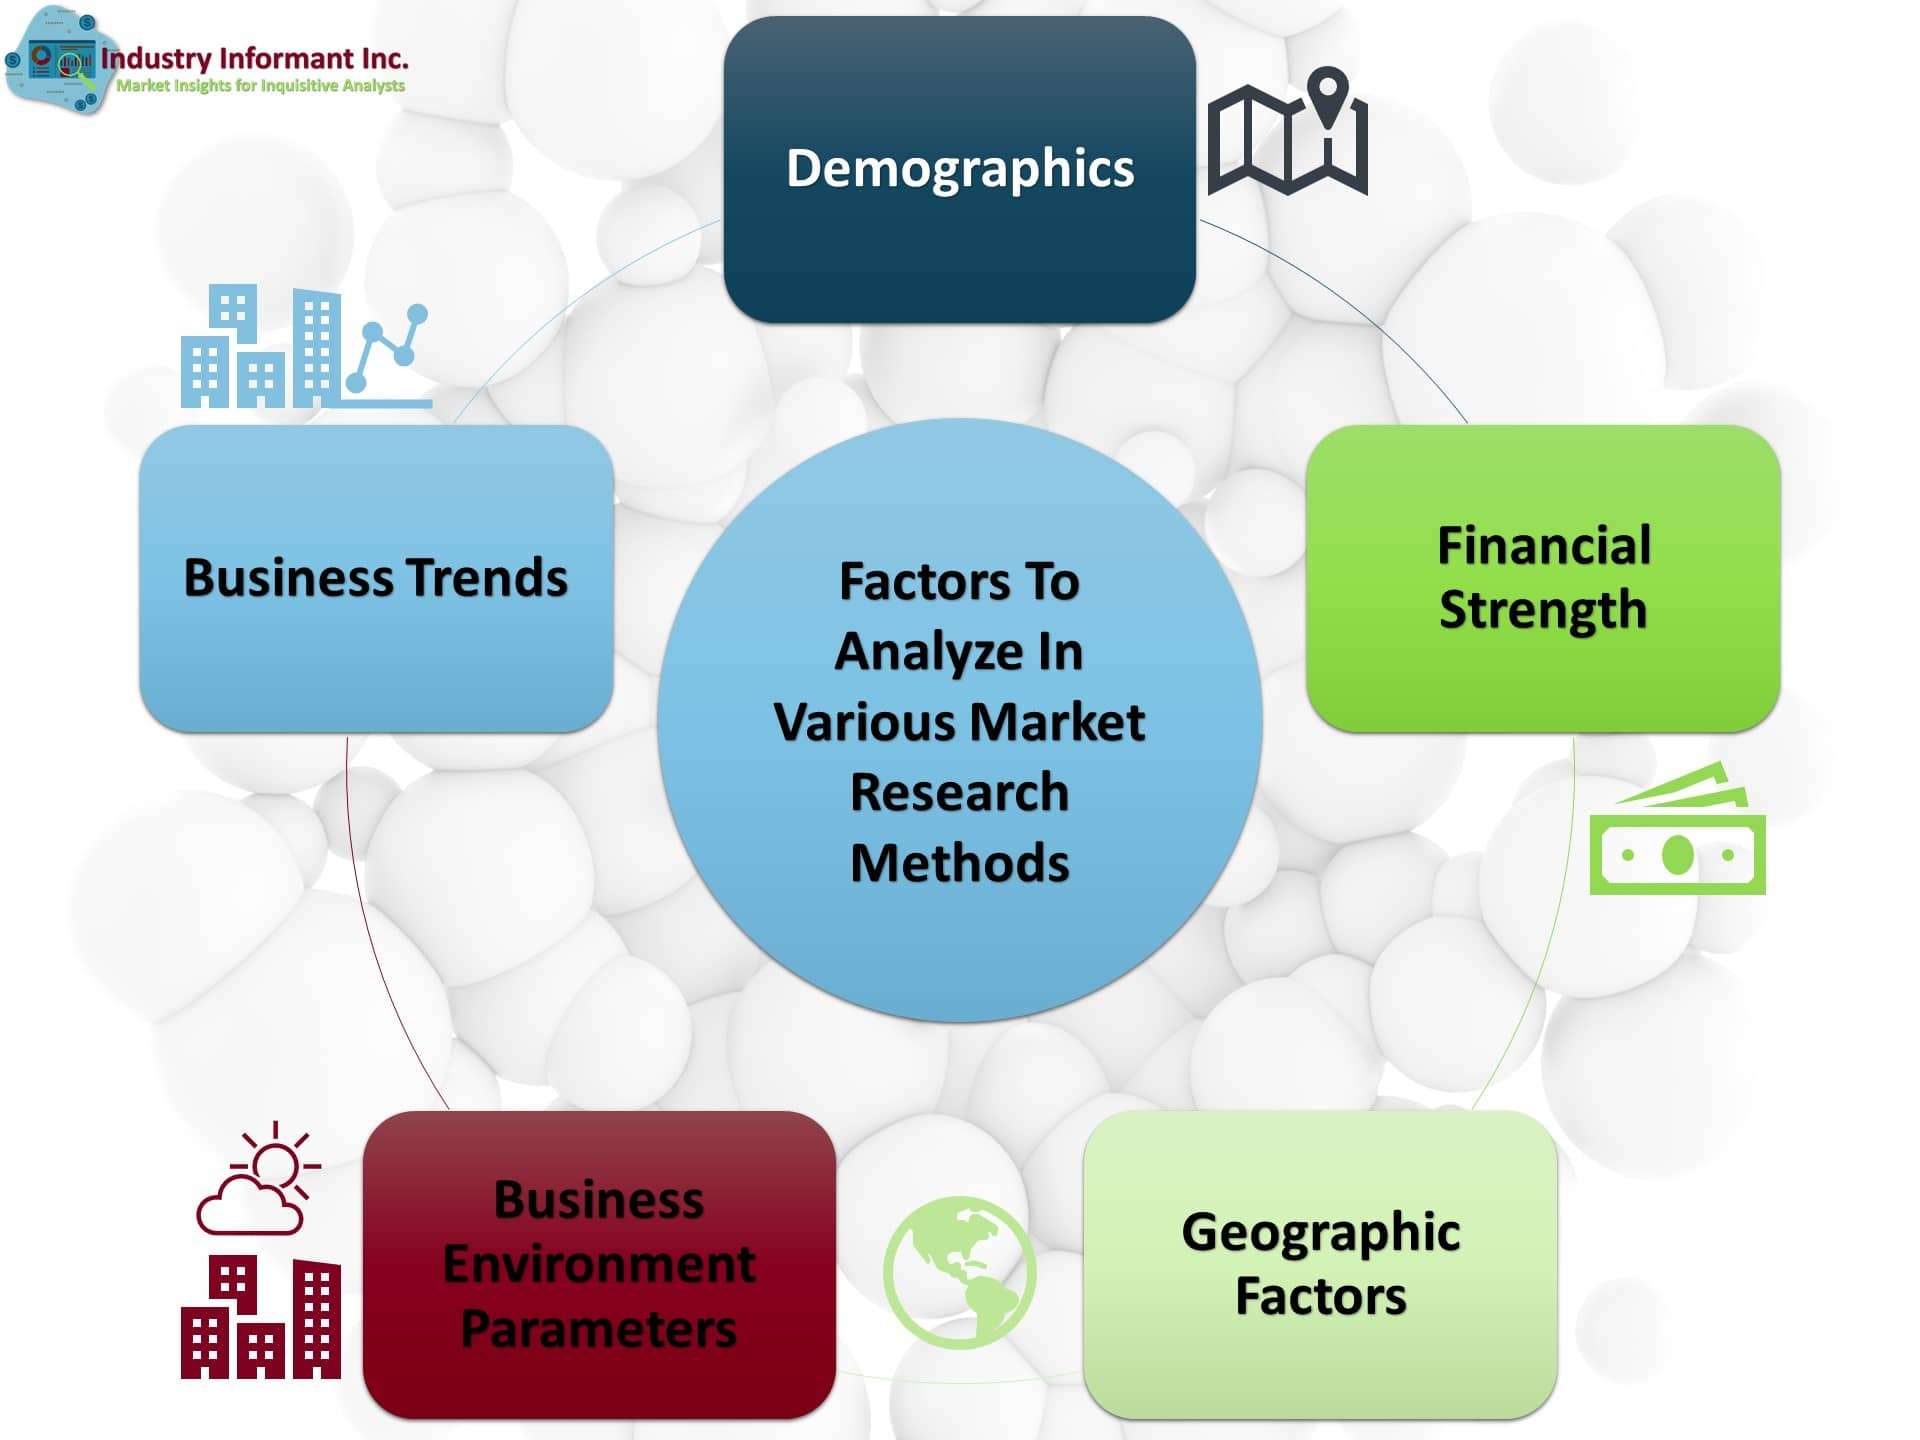 Factors for various methods of market research